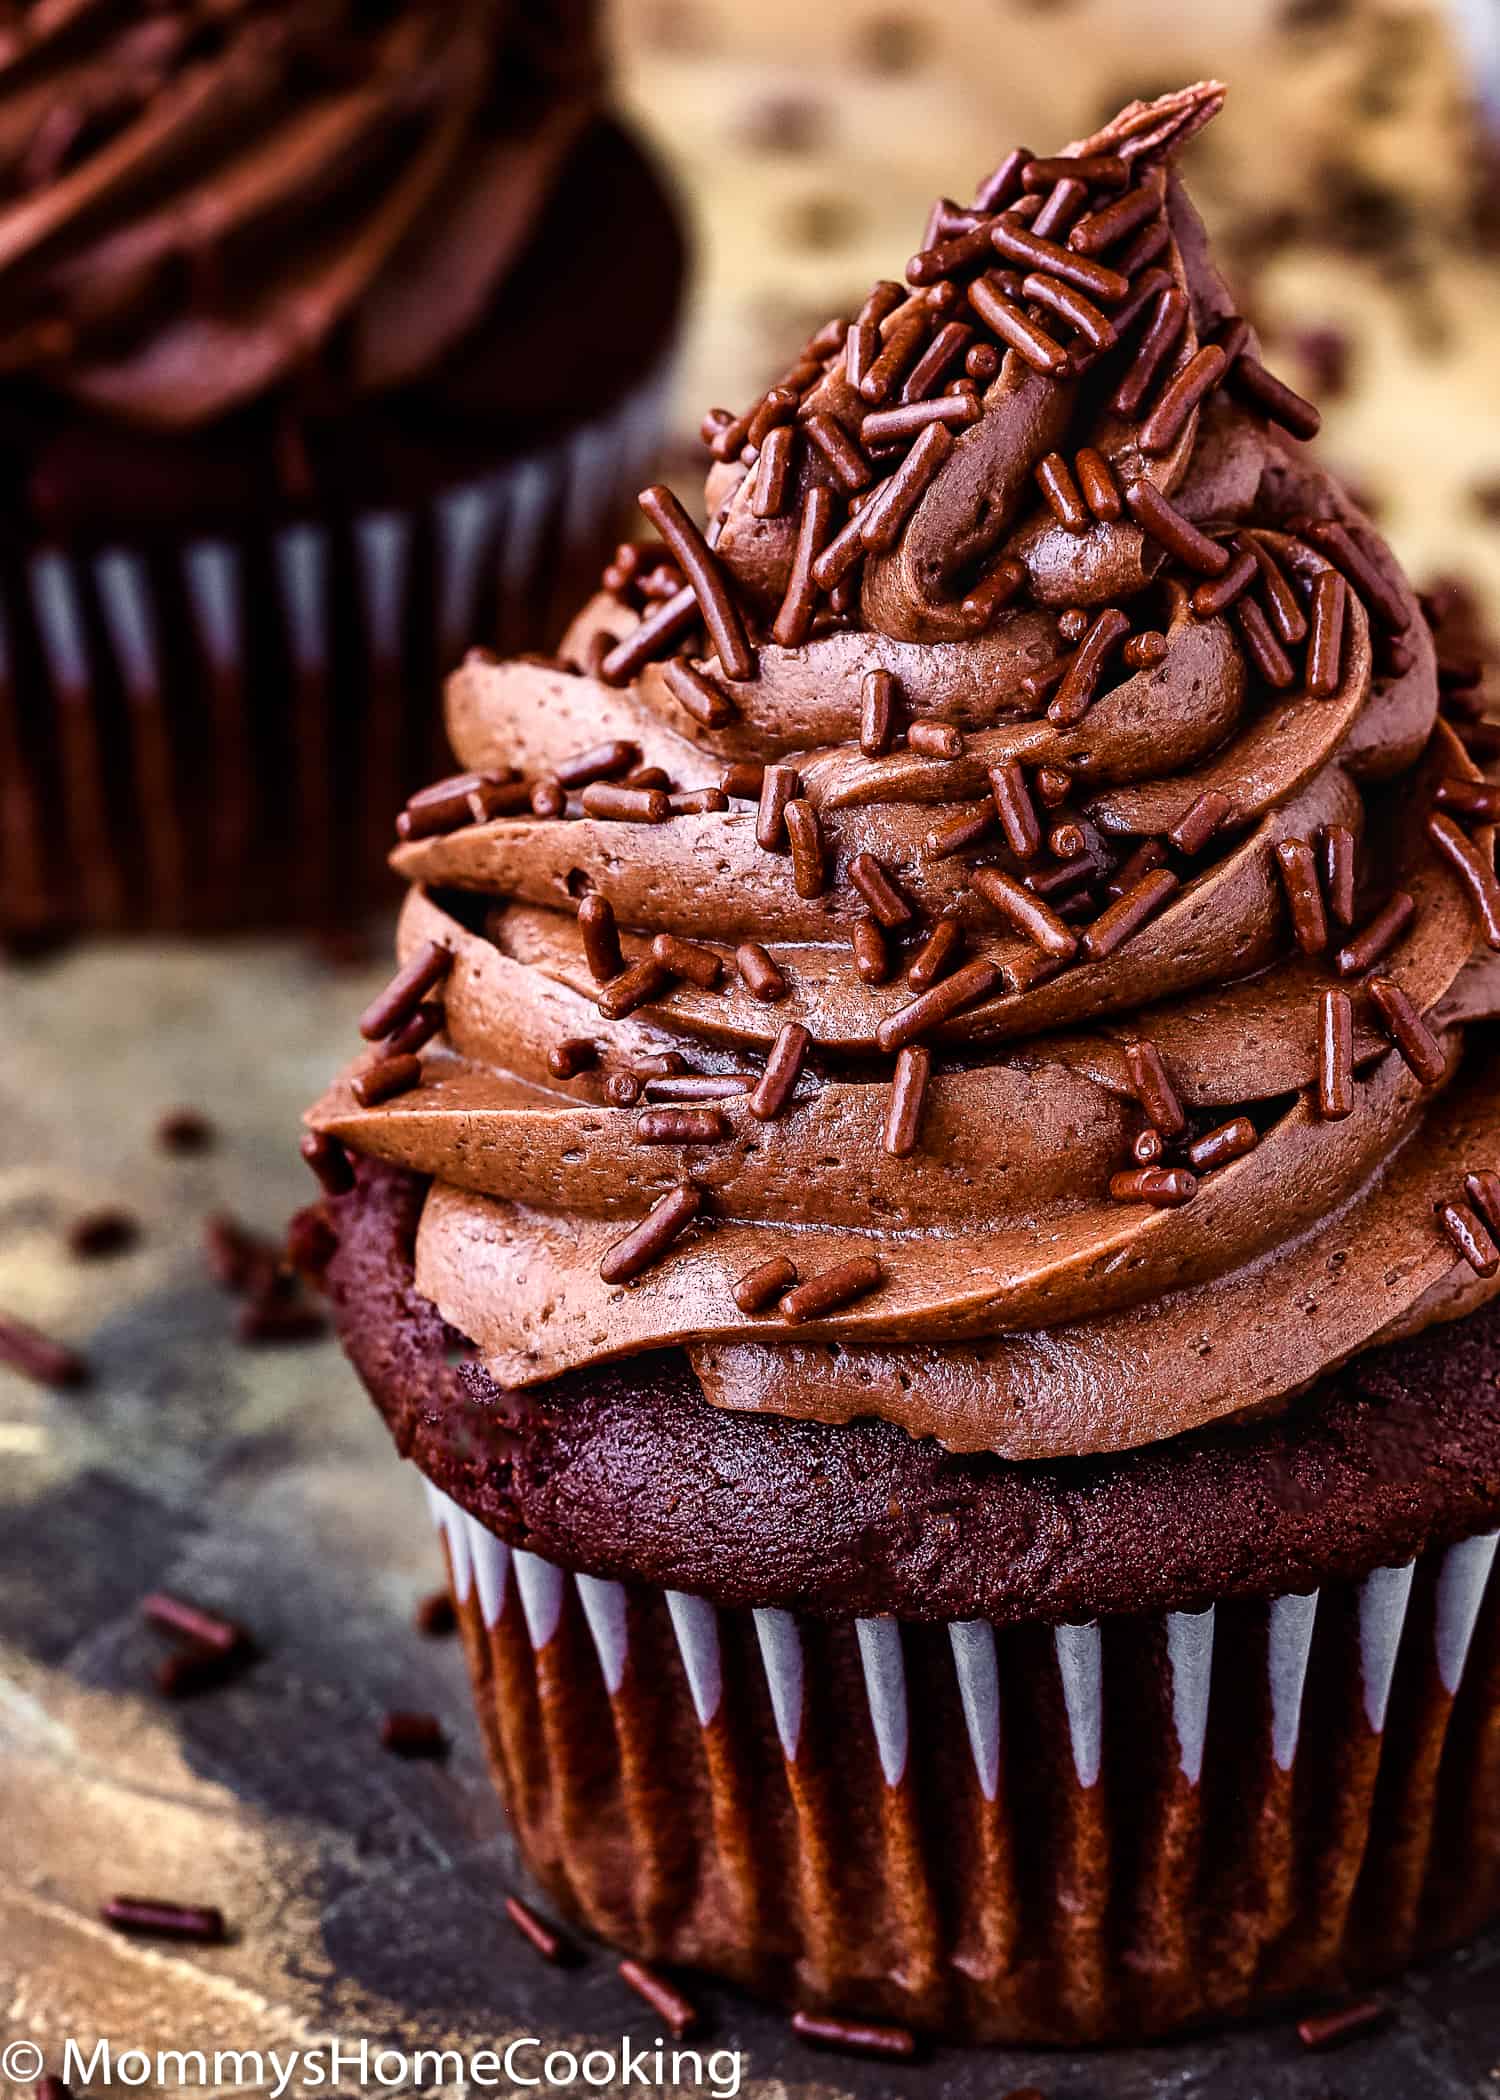 Eggless Chocolate Cupcake with chocolate frosting.